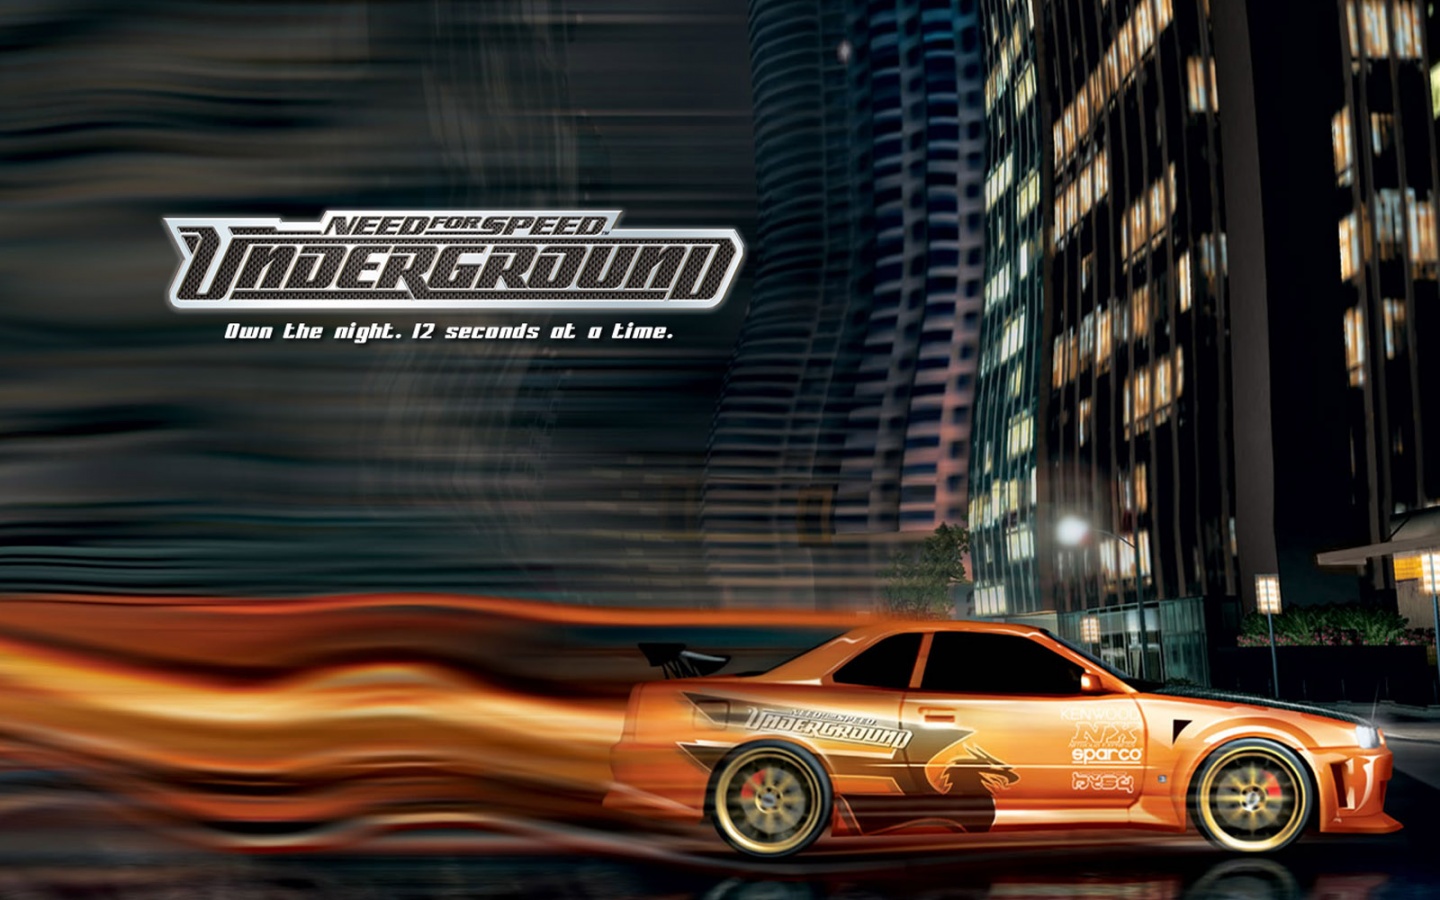 need for speed: underground, video game, car, game, need for speed, underground